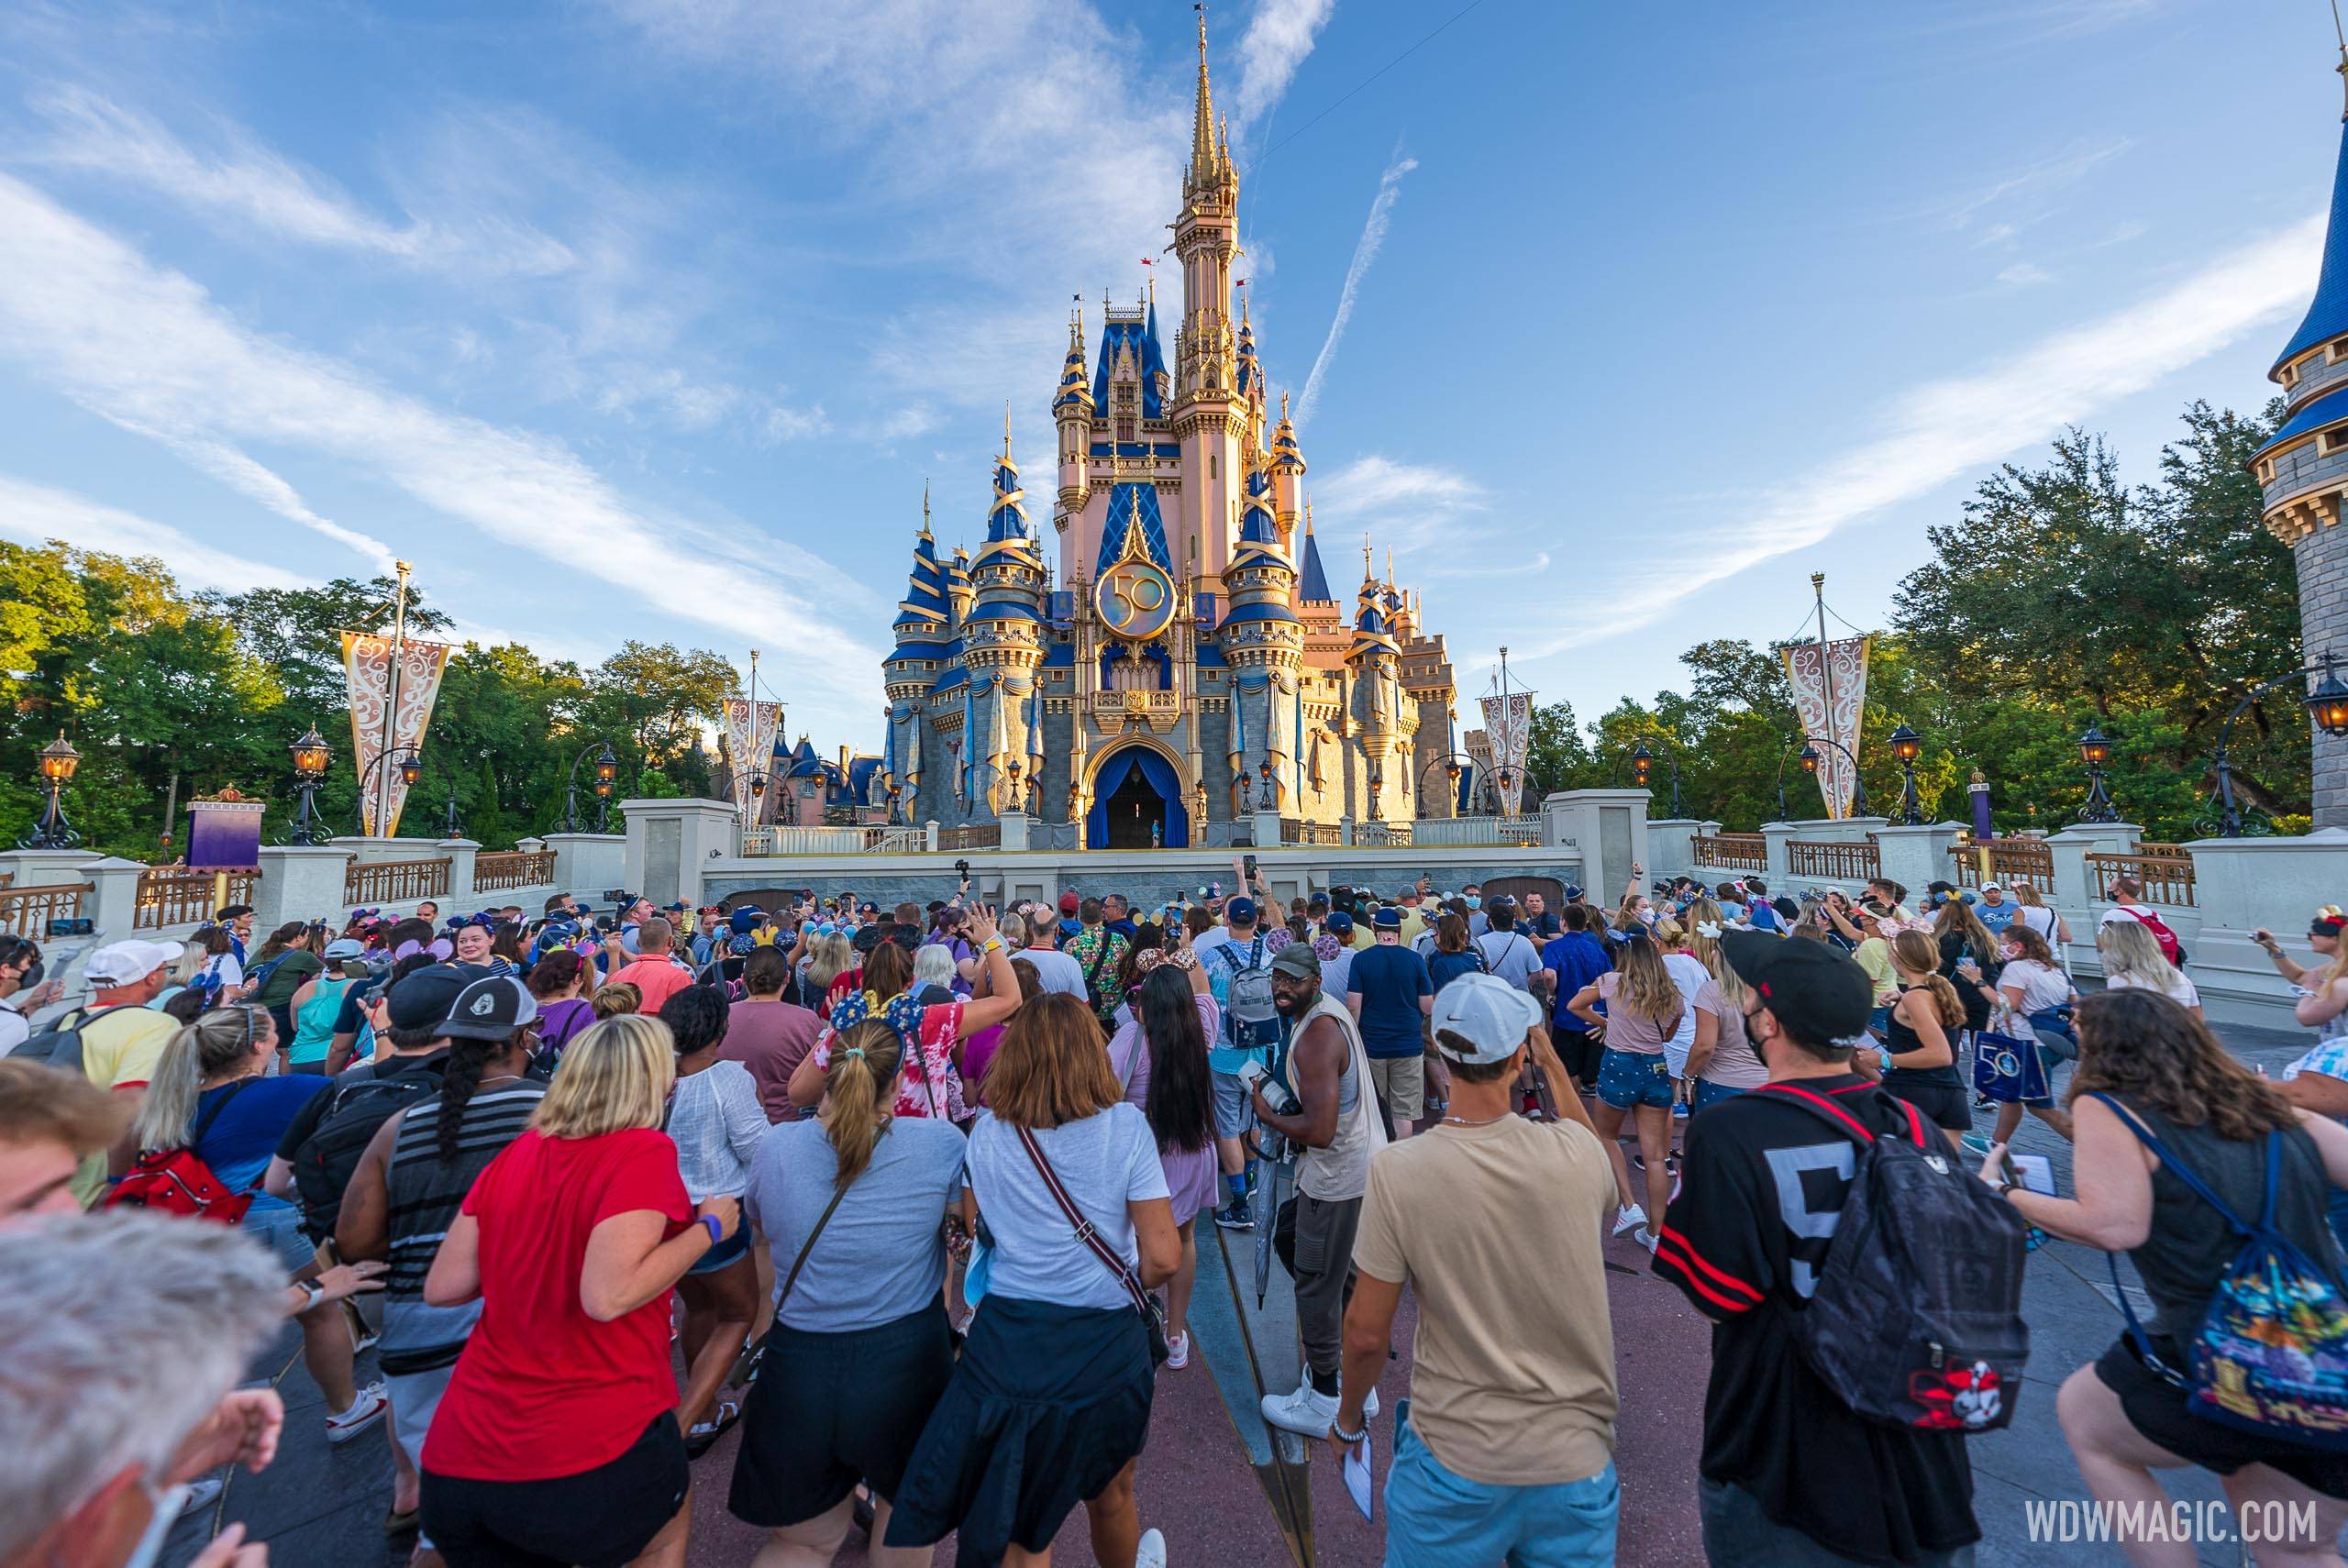 Magic Kingdom has experienced high attendance today as the park celebrates its 50th anniversary